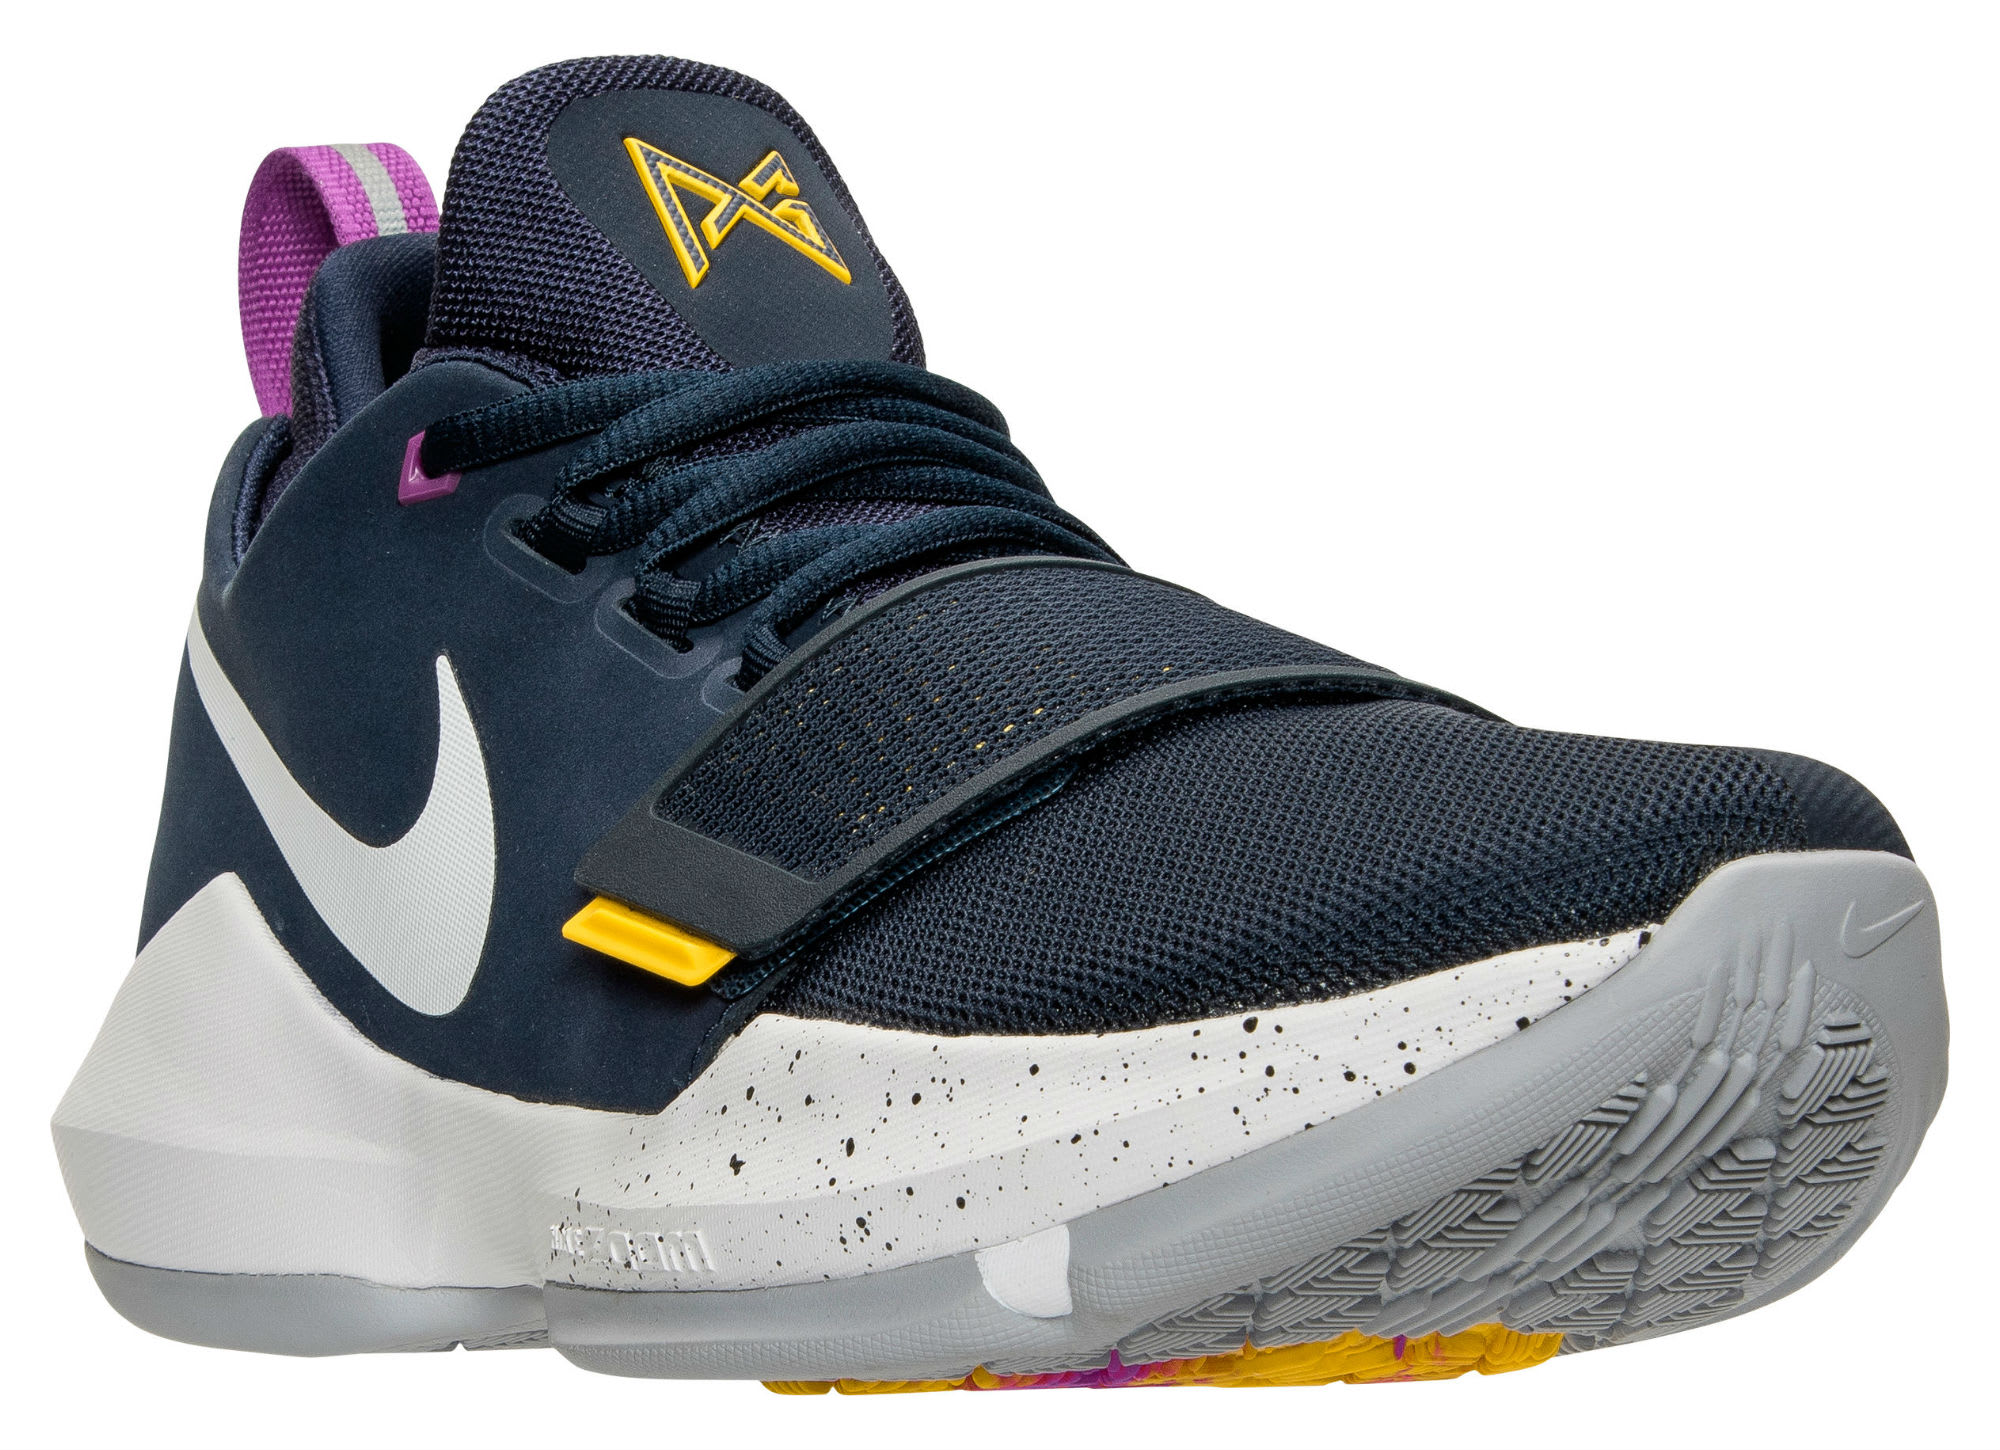 pg13 shoes Kevin Durant shoes on sale